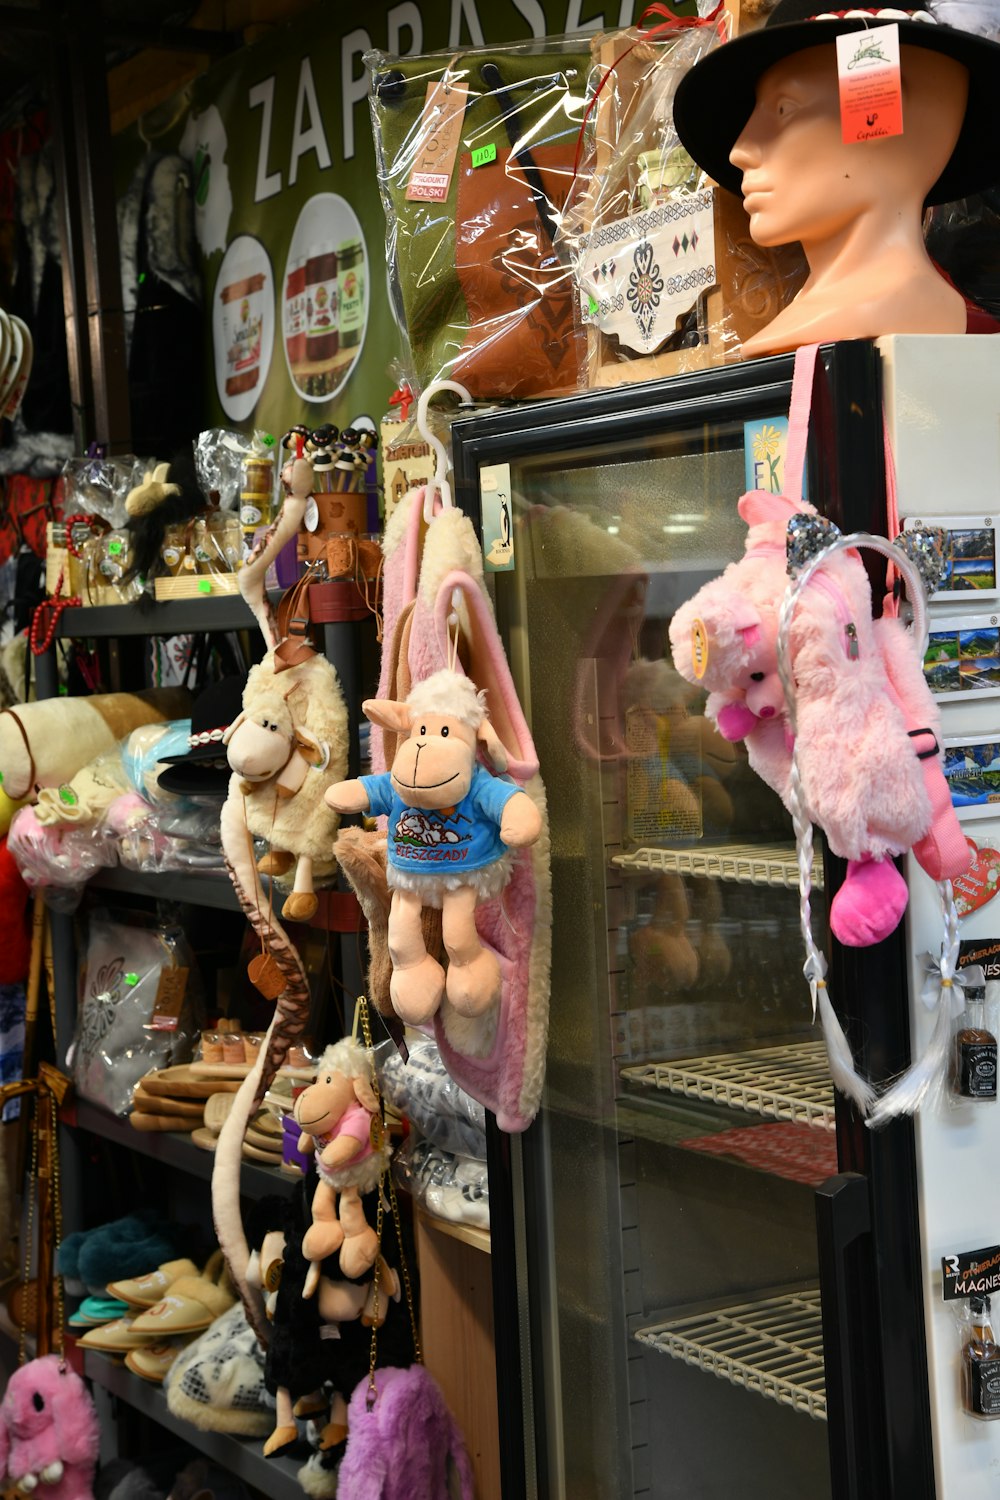 a display of stuffed animals in a store